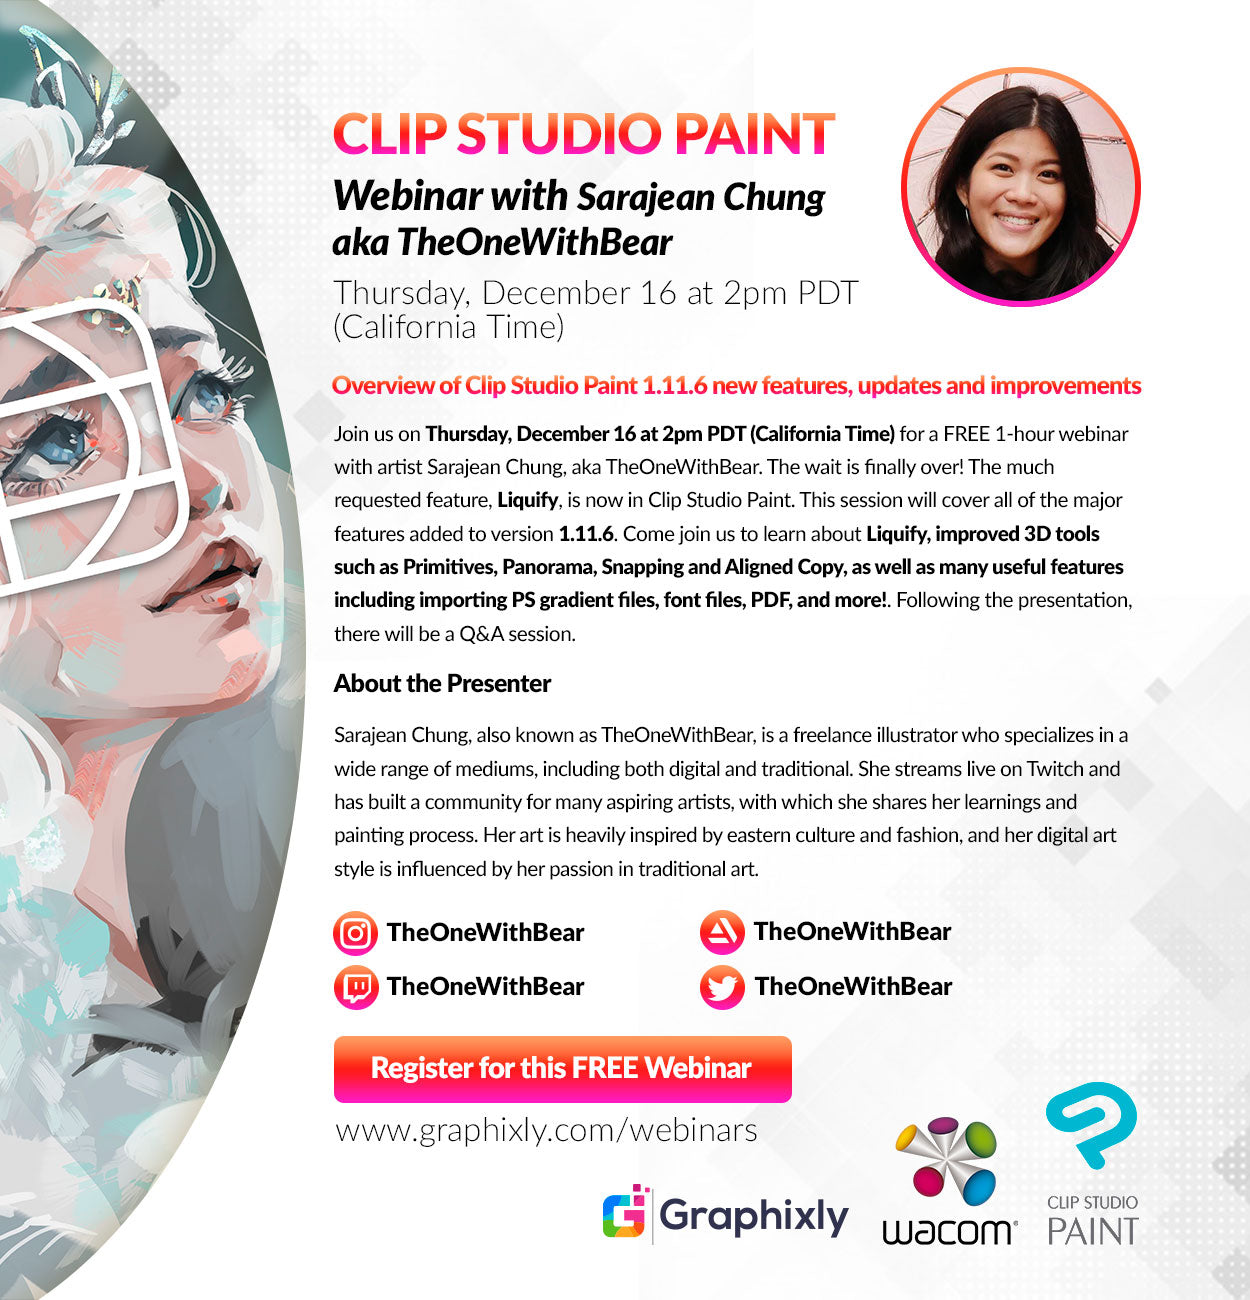 Webinar – Overview of Clip Studio Paint 1.11.6 new features, updates and improvements with Sarajean Chung